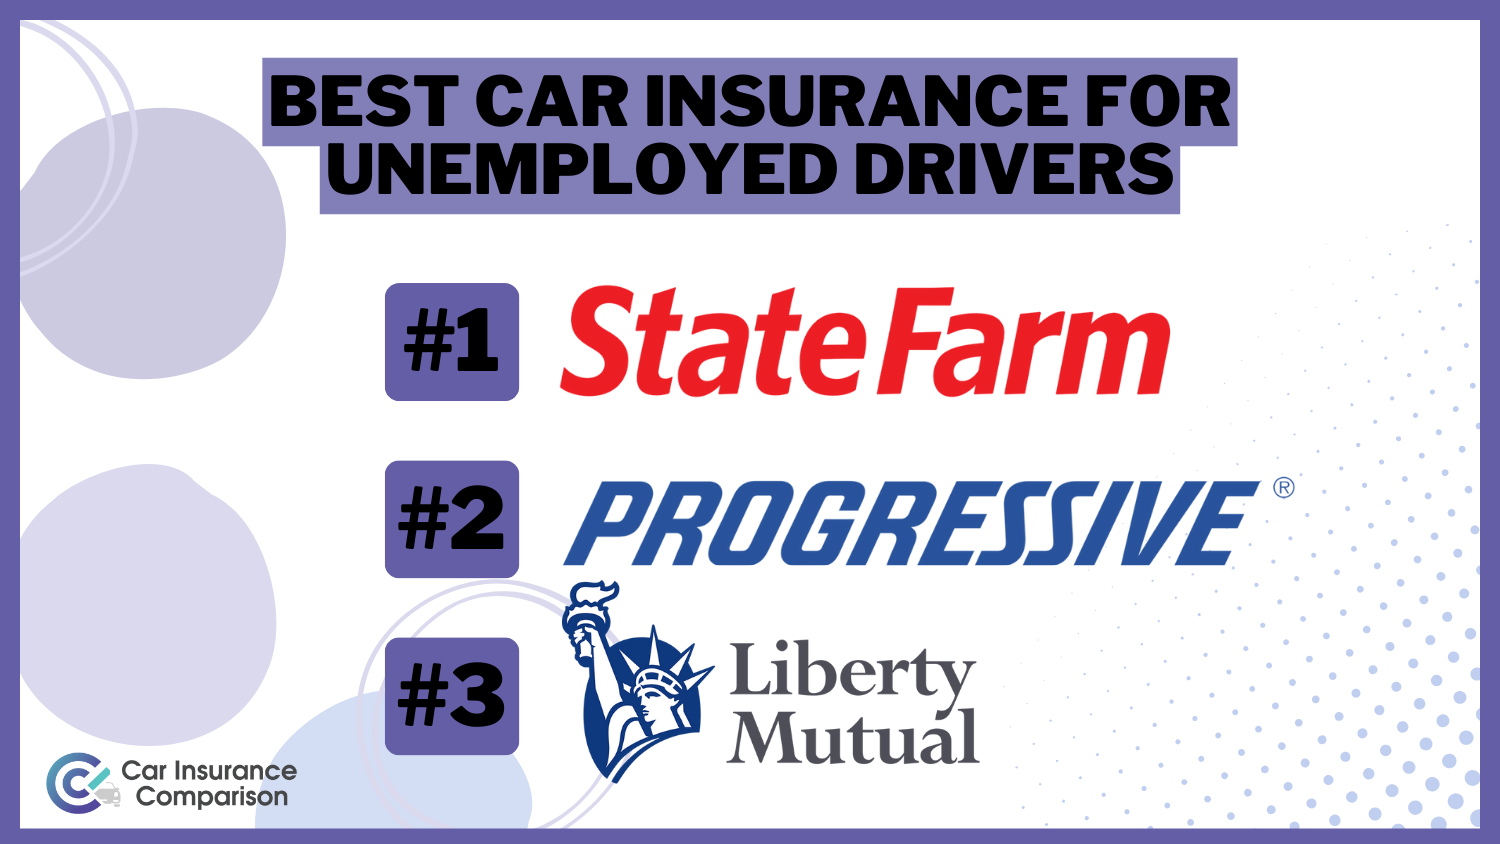 3 Best Car Insurance for Unemployed Driver: State farm, Progressive, and Liberty Mutual